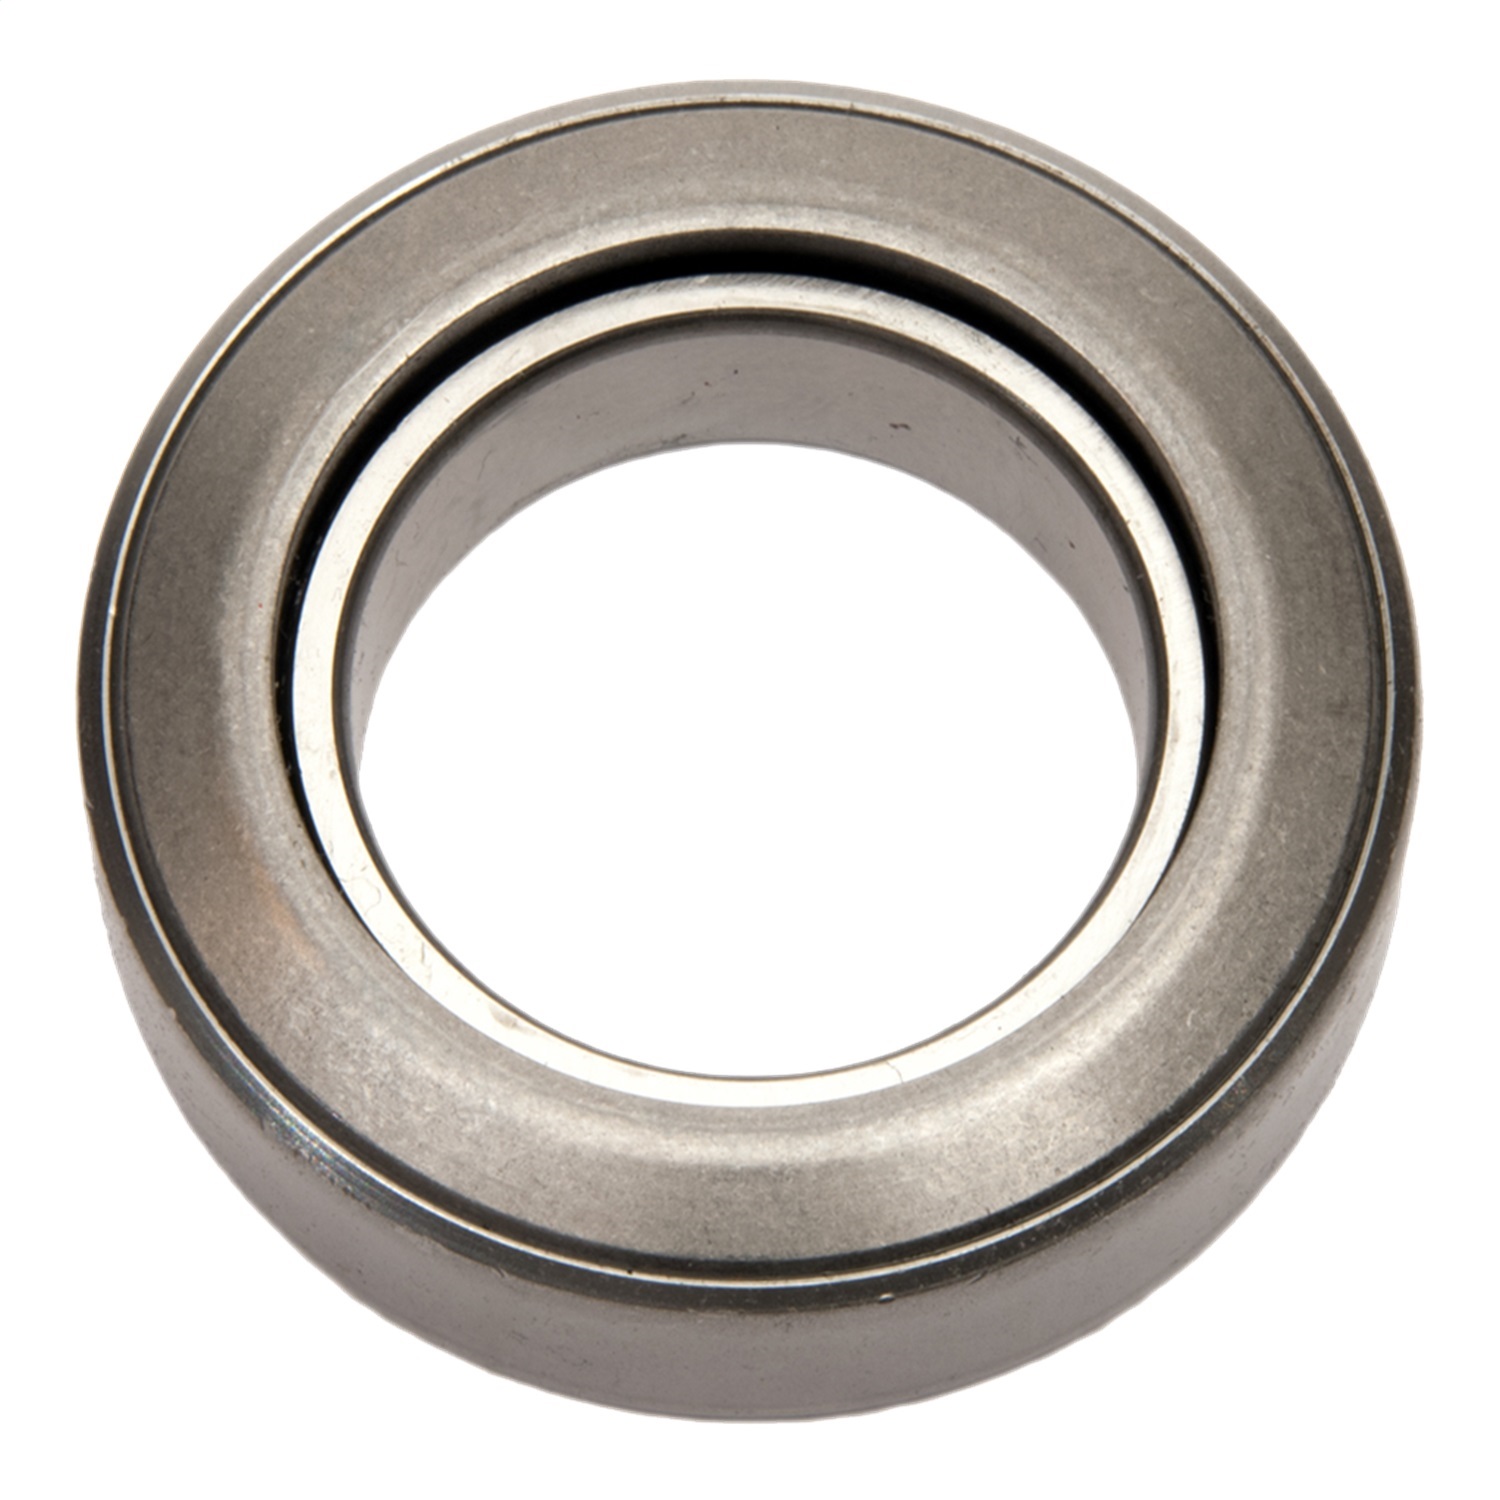 Centerforce Centerforce 201 Throwout Bearing